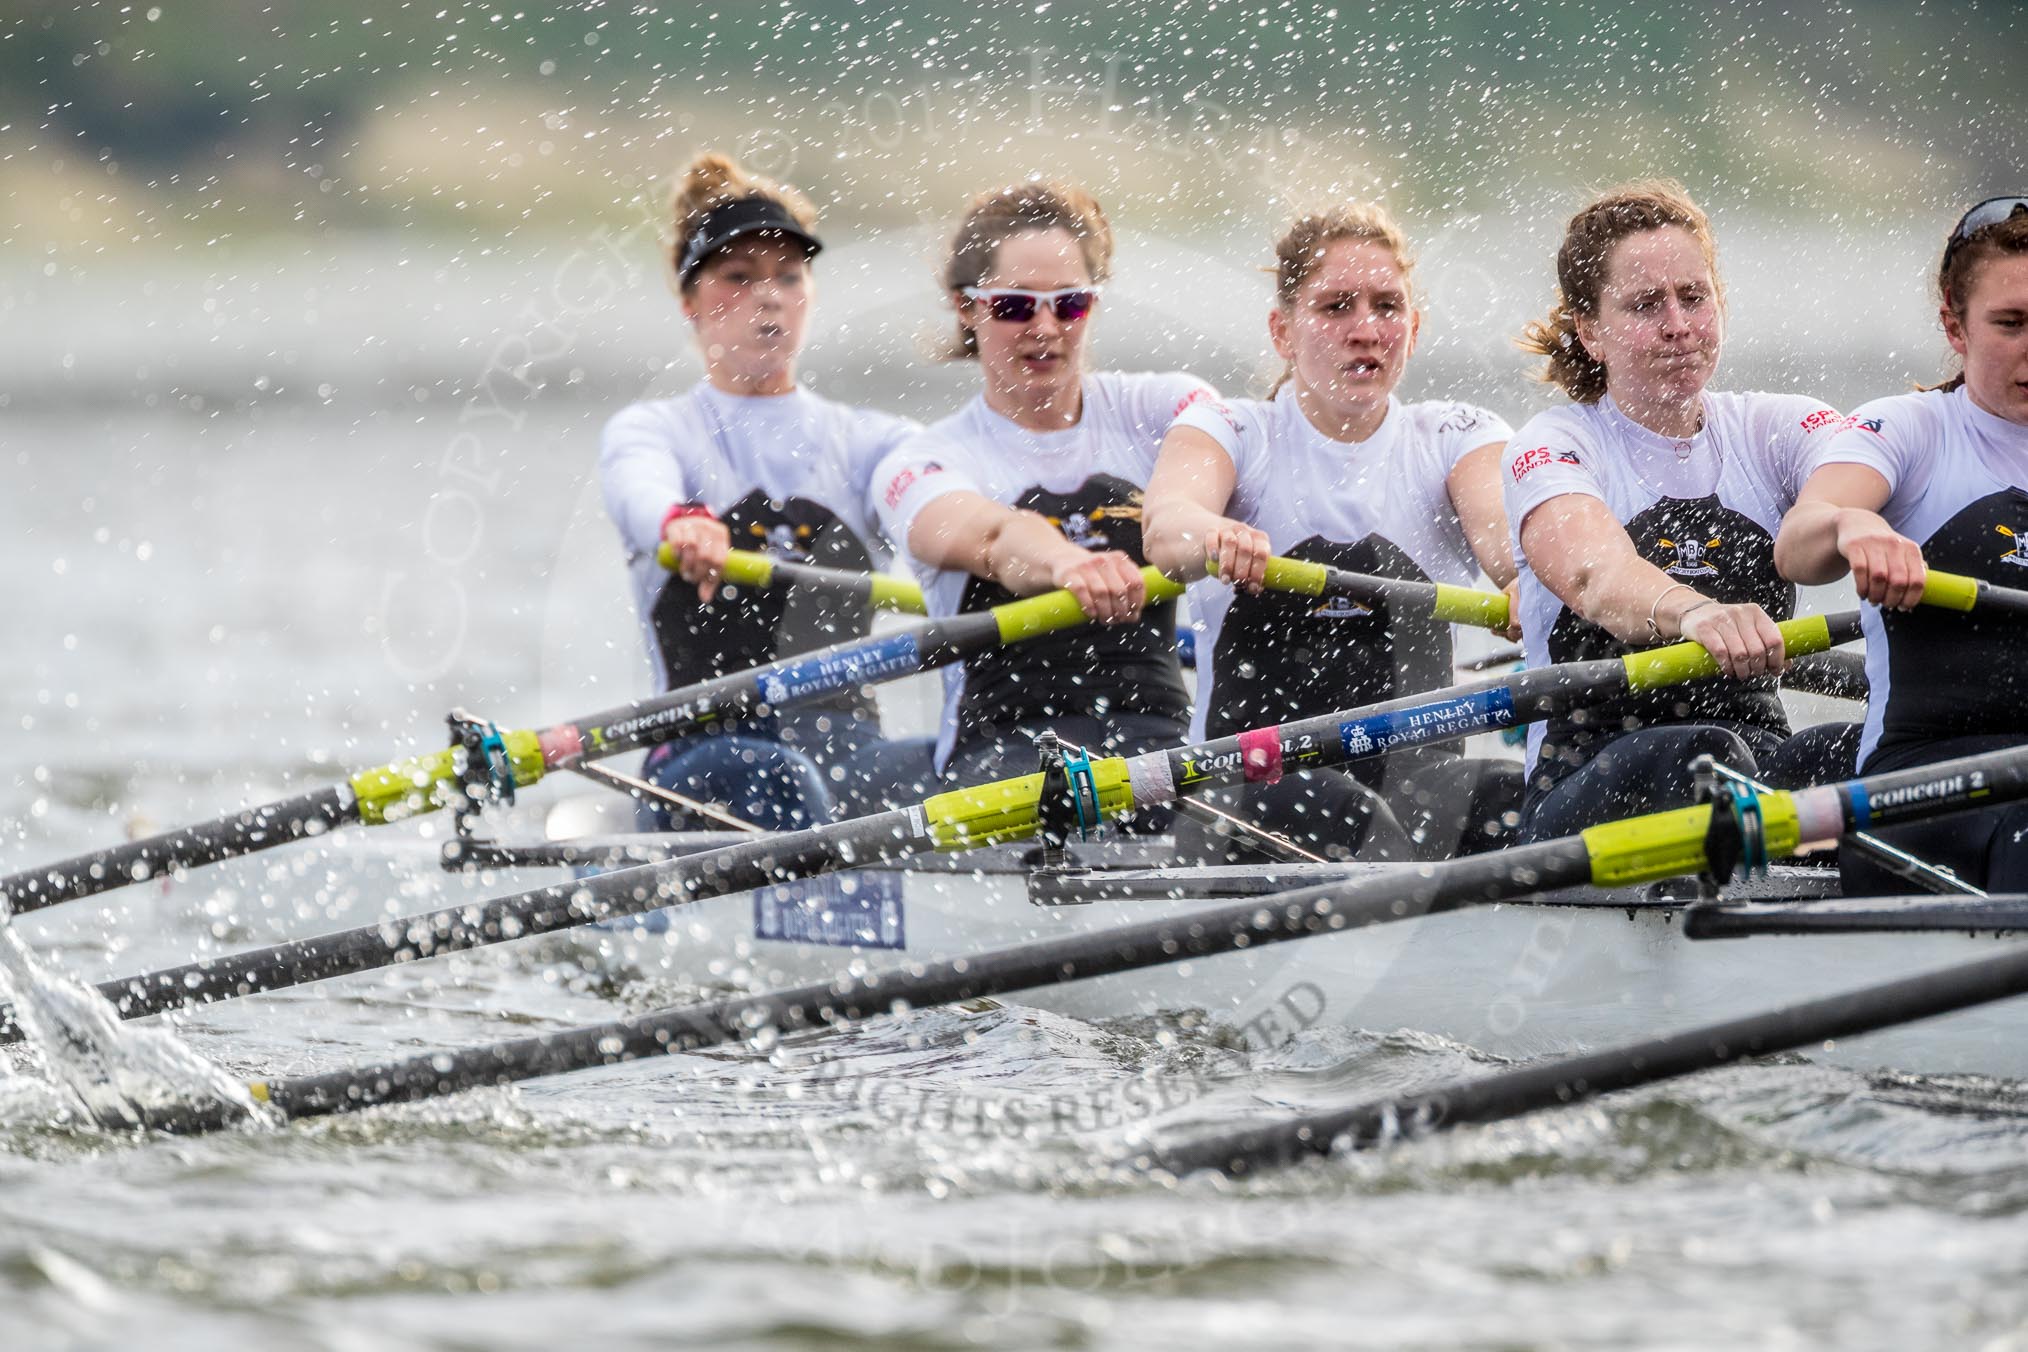 The Cancer Research UK Boat Race season 2017 - Women's Boat Race Fixture OUWBC vs Molesey BC: Molesey behind spray - bow Emma McDonald, 2 Caitlin Boyland, 3 Lucy Primmer, 4 Claire McKeown, 5 Katie Bartlett.
River Thames between Putney Bridge and Mortlake,
London SW15,

United Kingdom,
on 19 March 2017 at 16:21, image #136